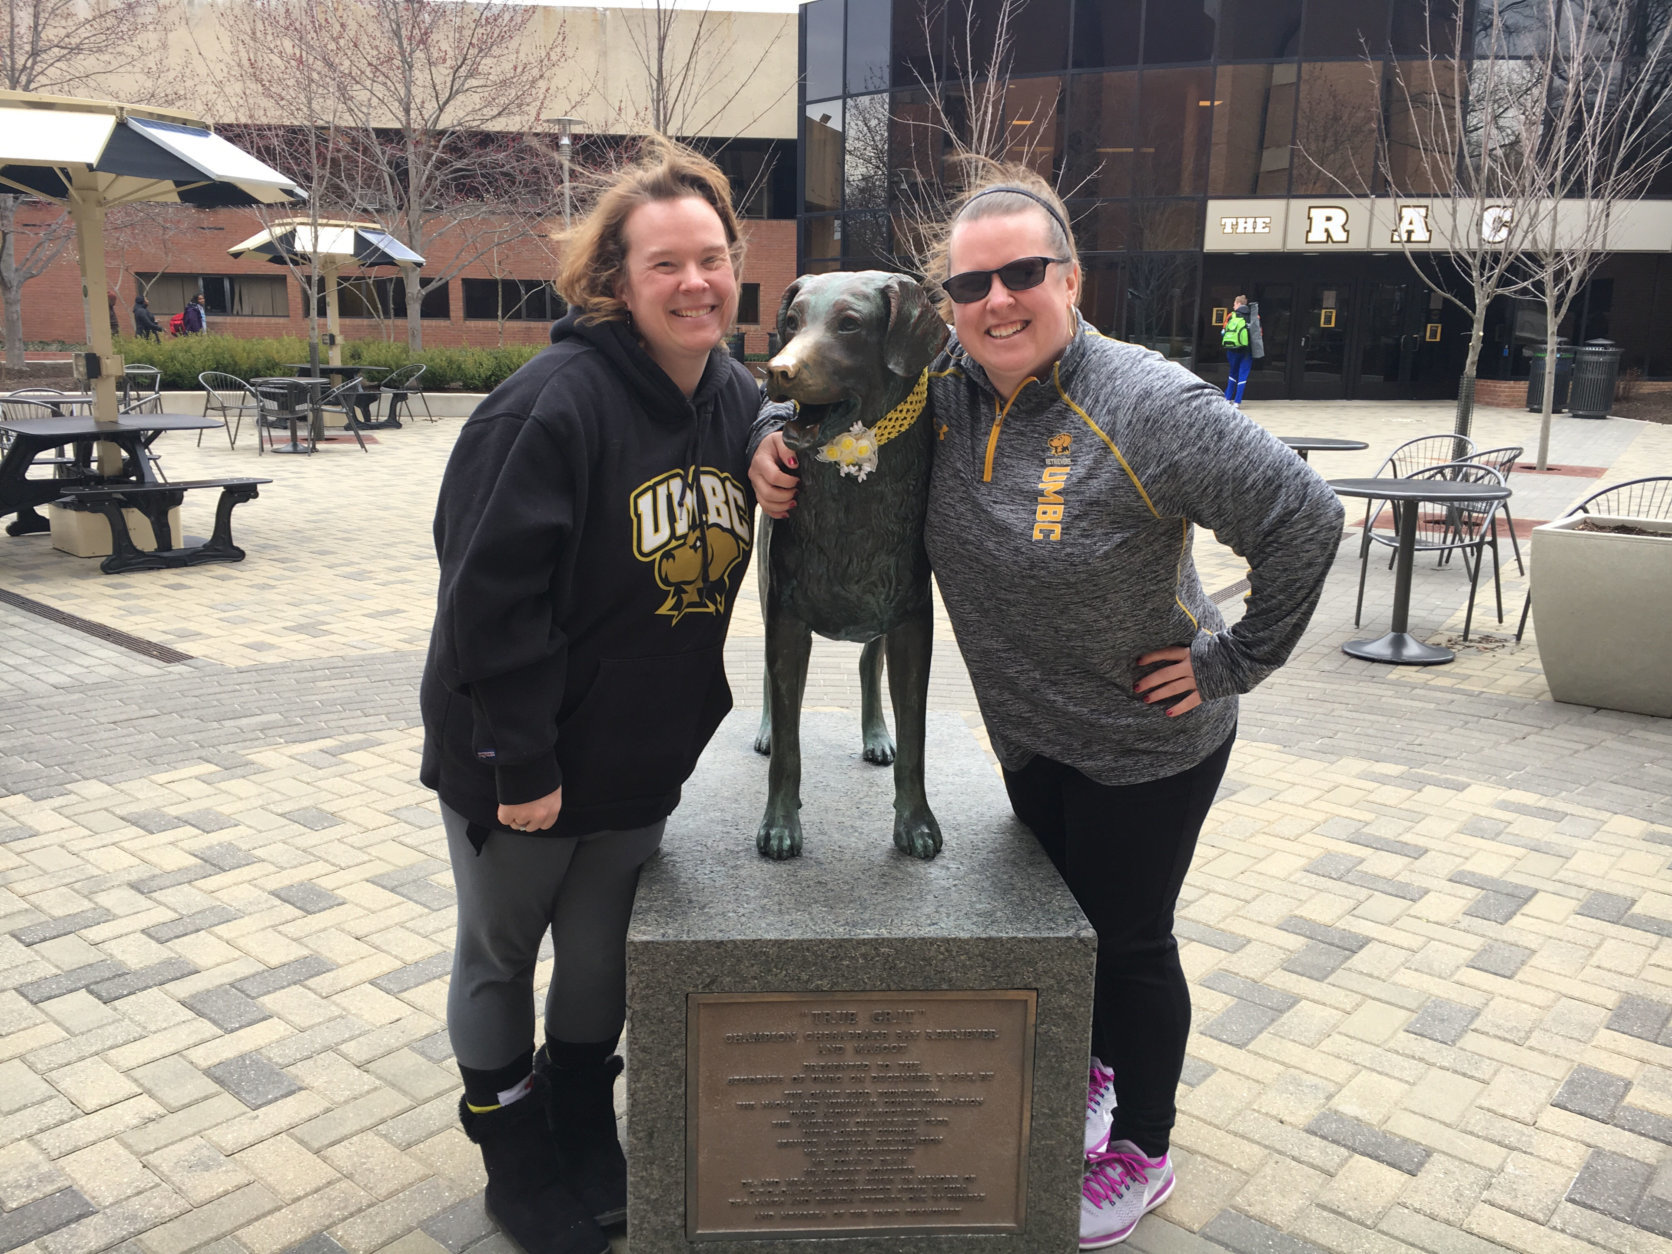 Twin sisters and UMBC alumni Heather Hensgen, left, and Holly Owens had to come see campus after Friday night’s win. (WTOP/Keara Dowd)